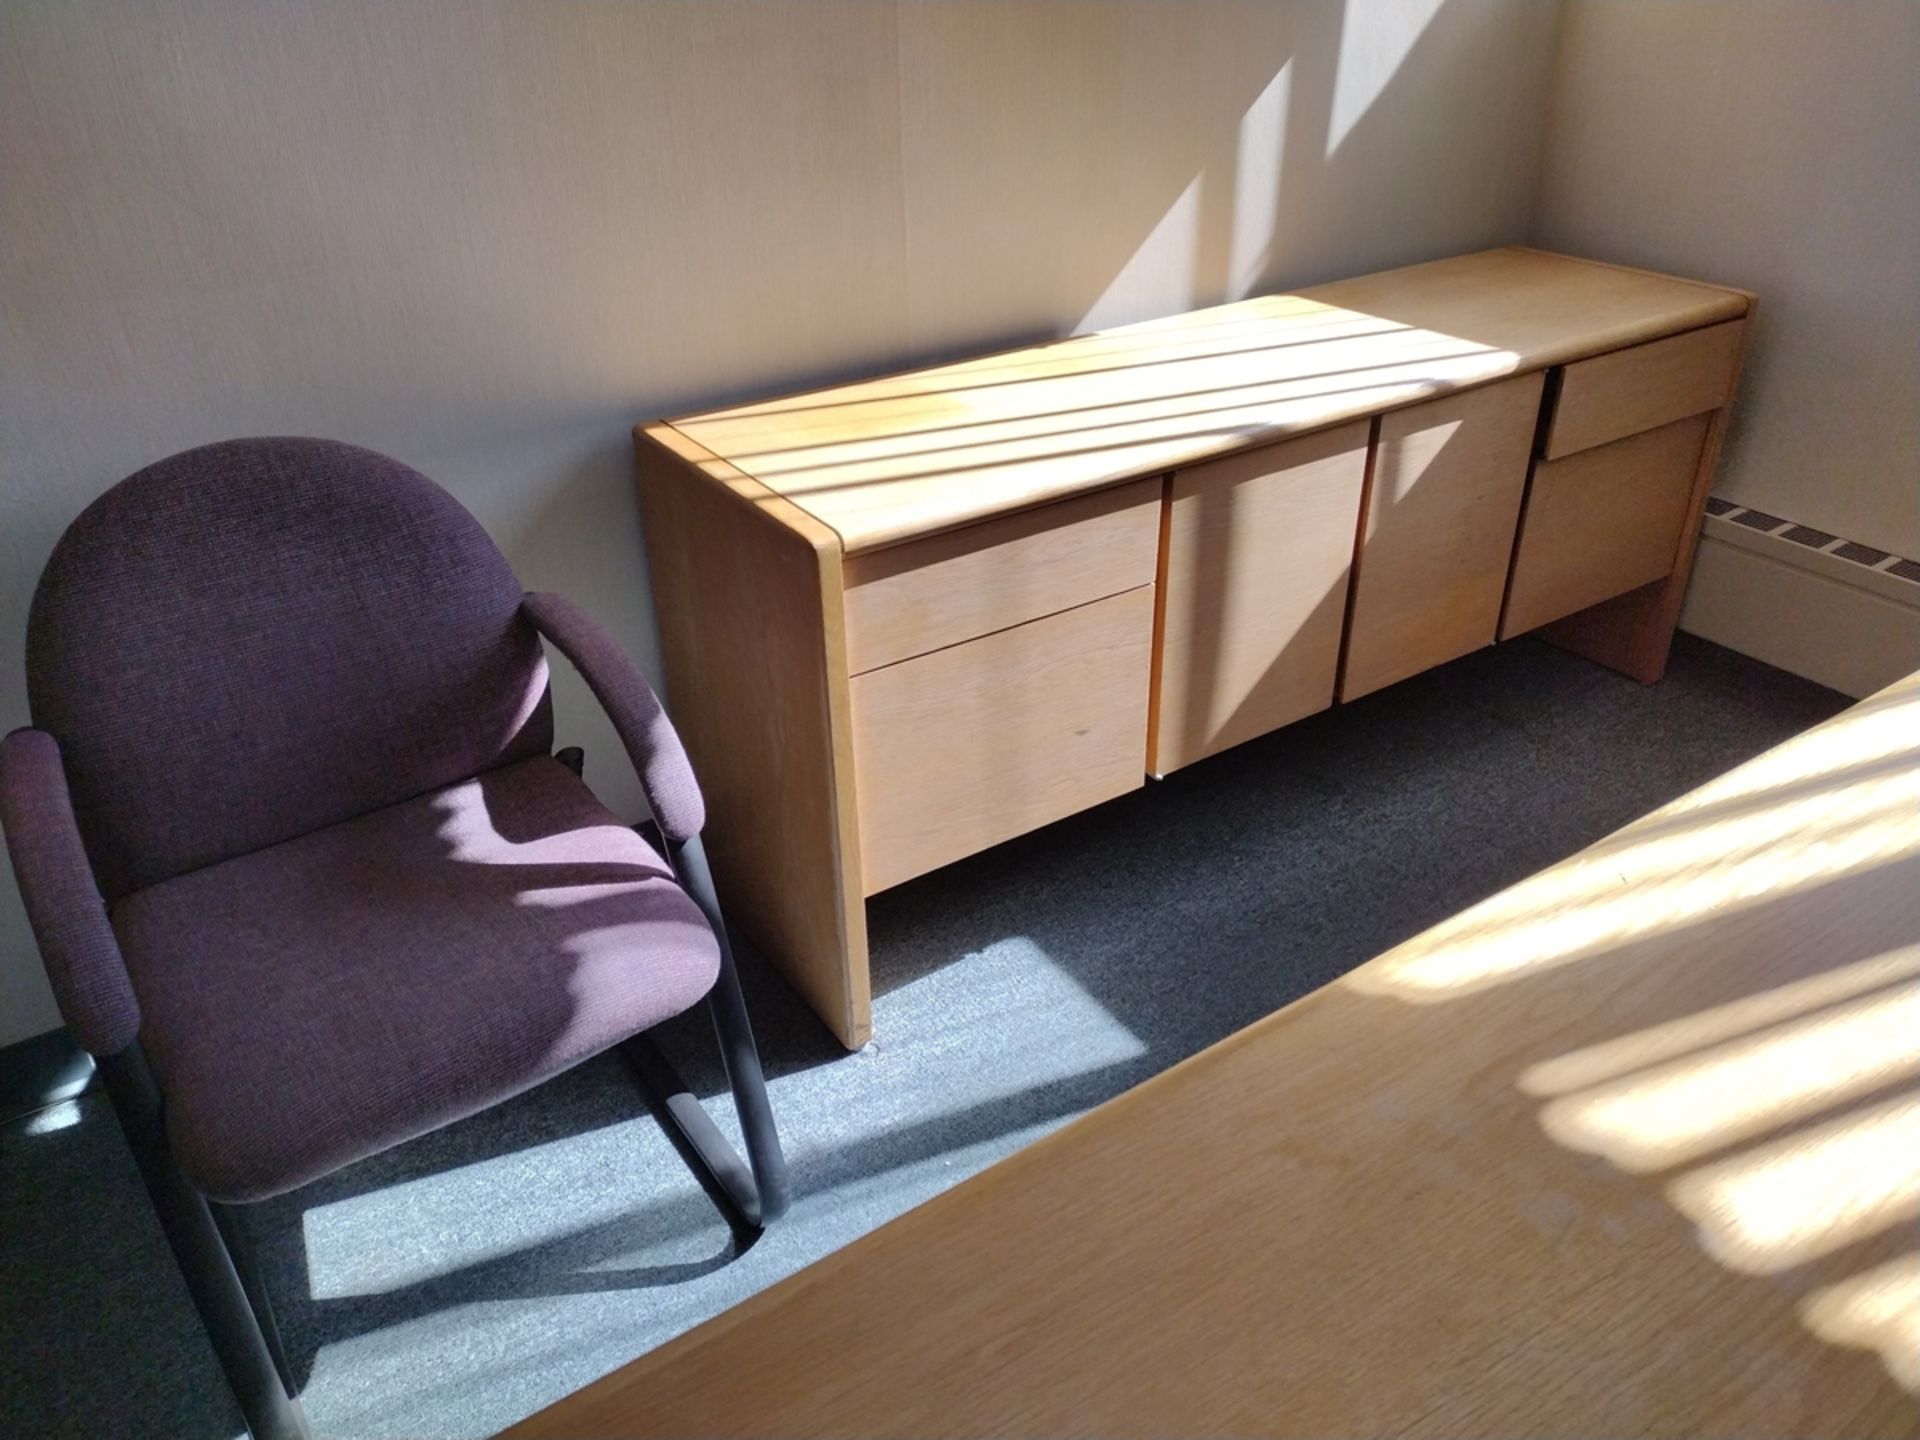 Group of Office Furniture Throughout Rooms - Image 2 of 14